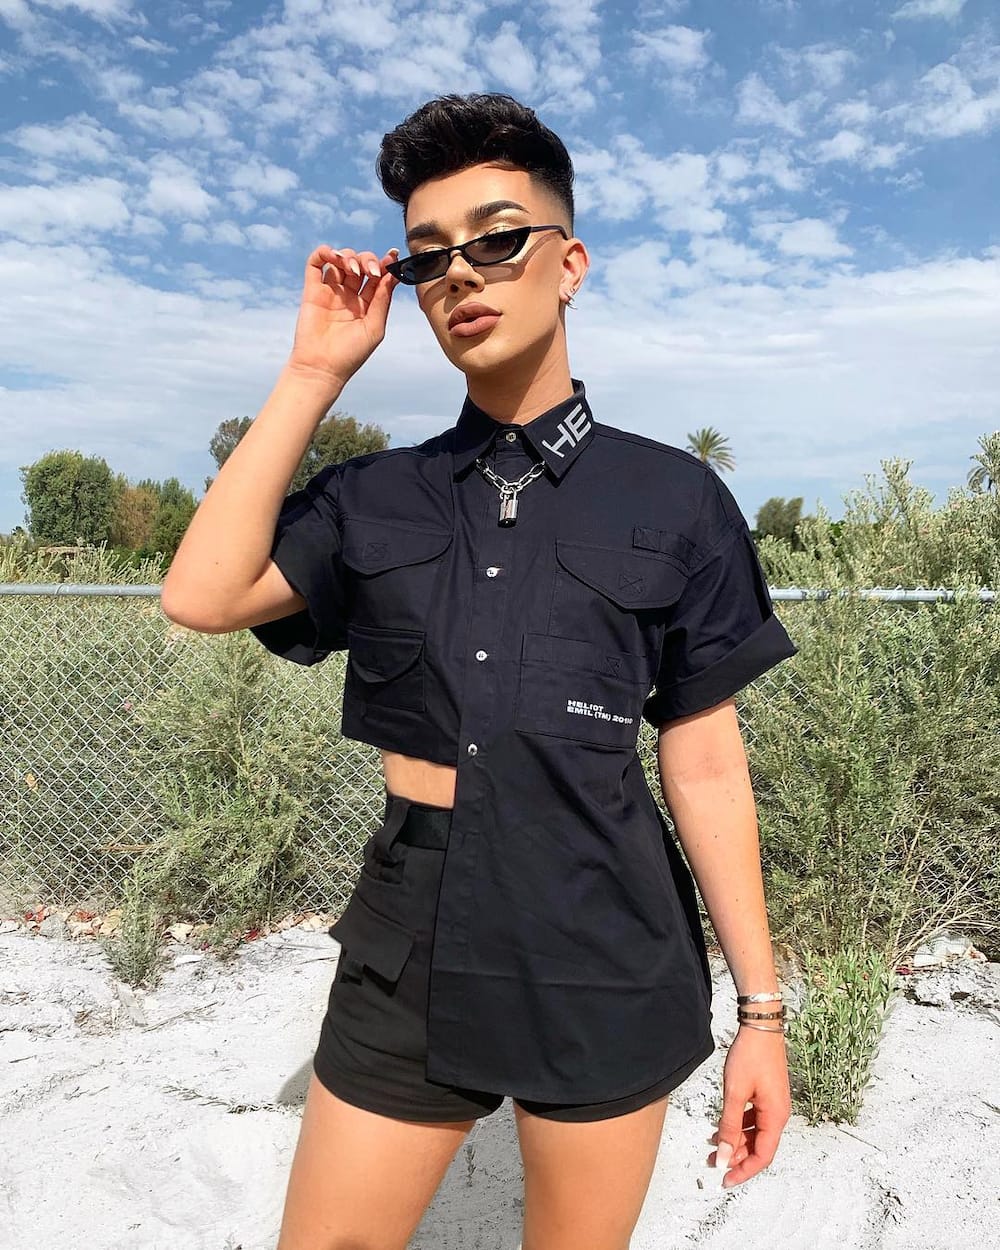 James Charles gender, brother, net worth, rise to fame